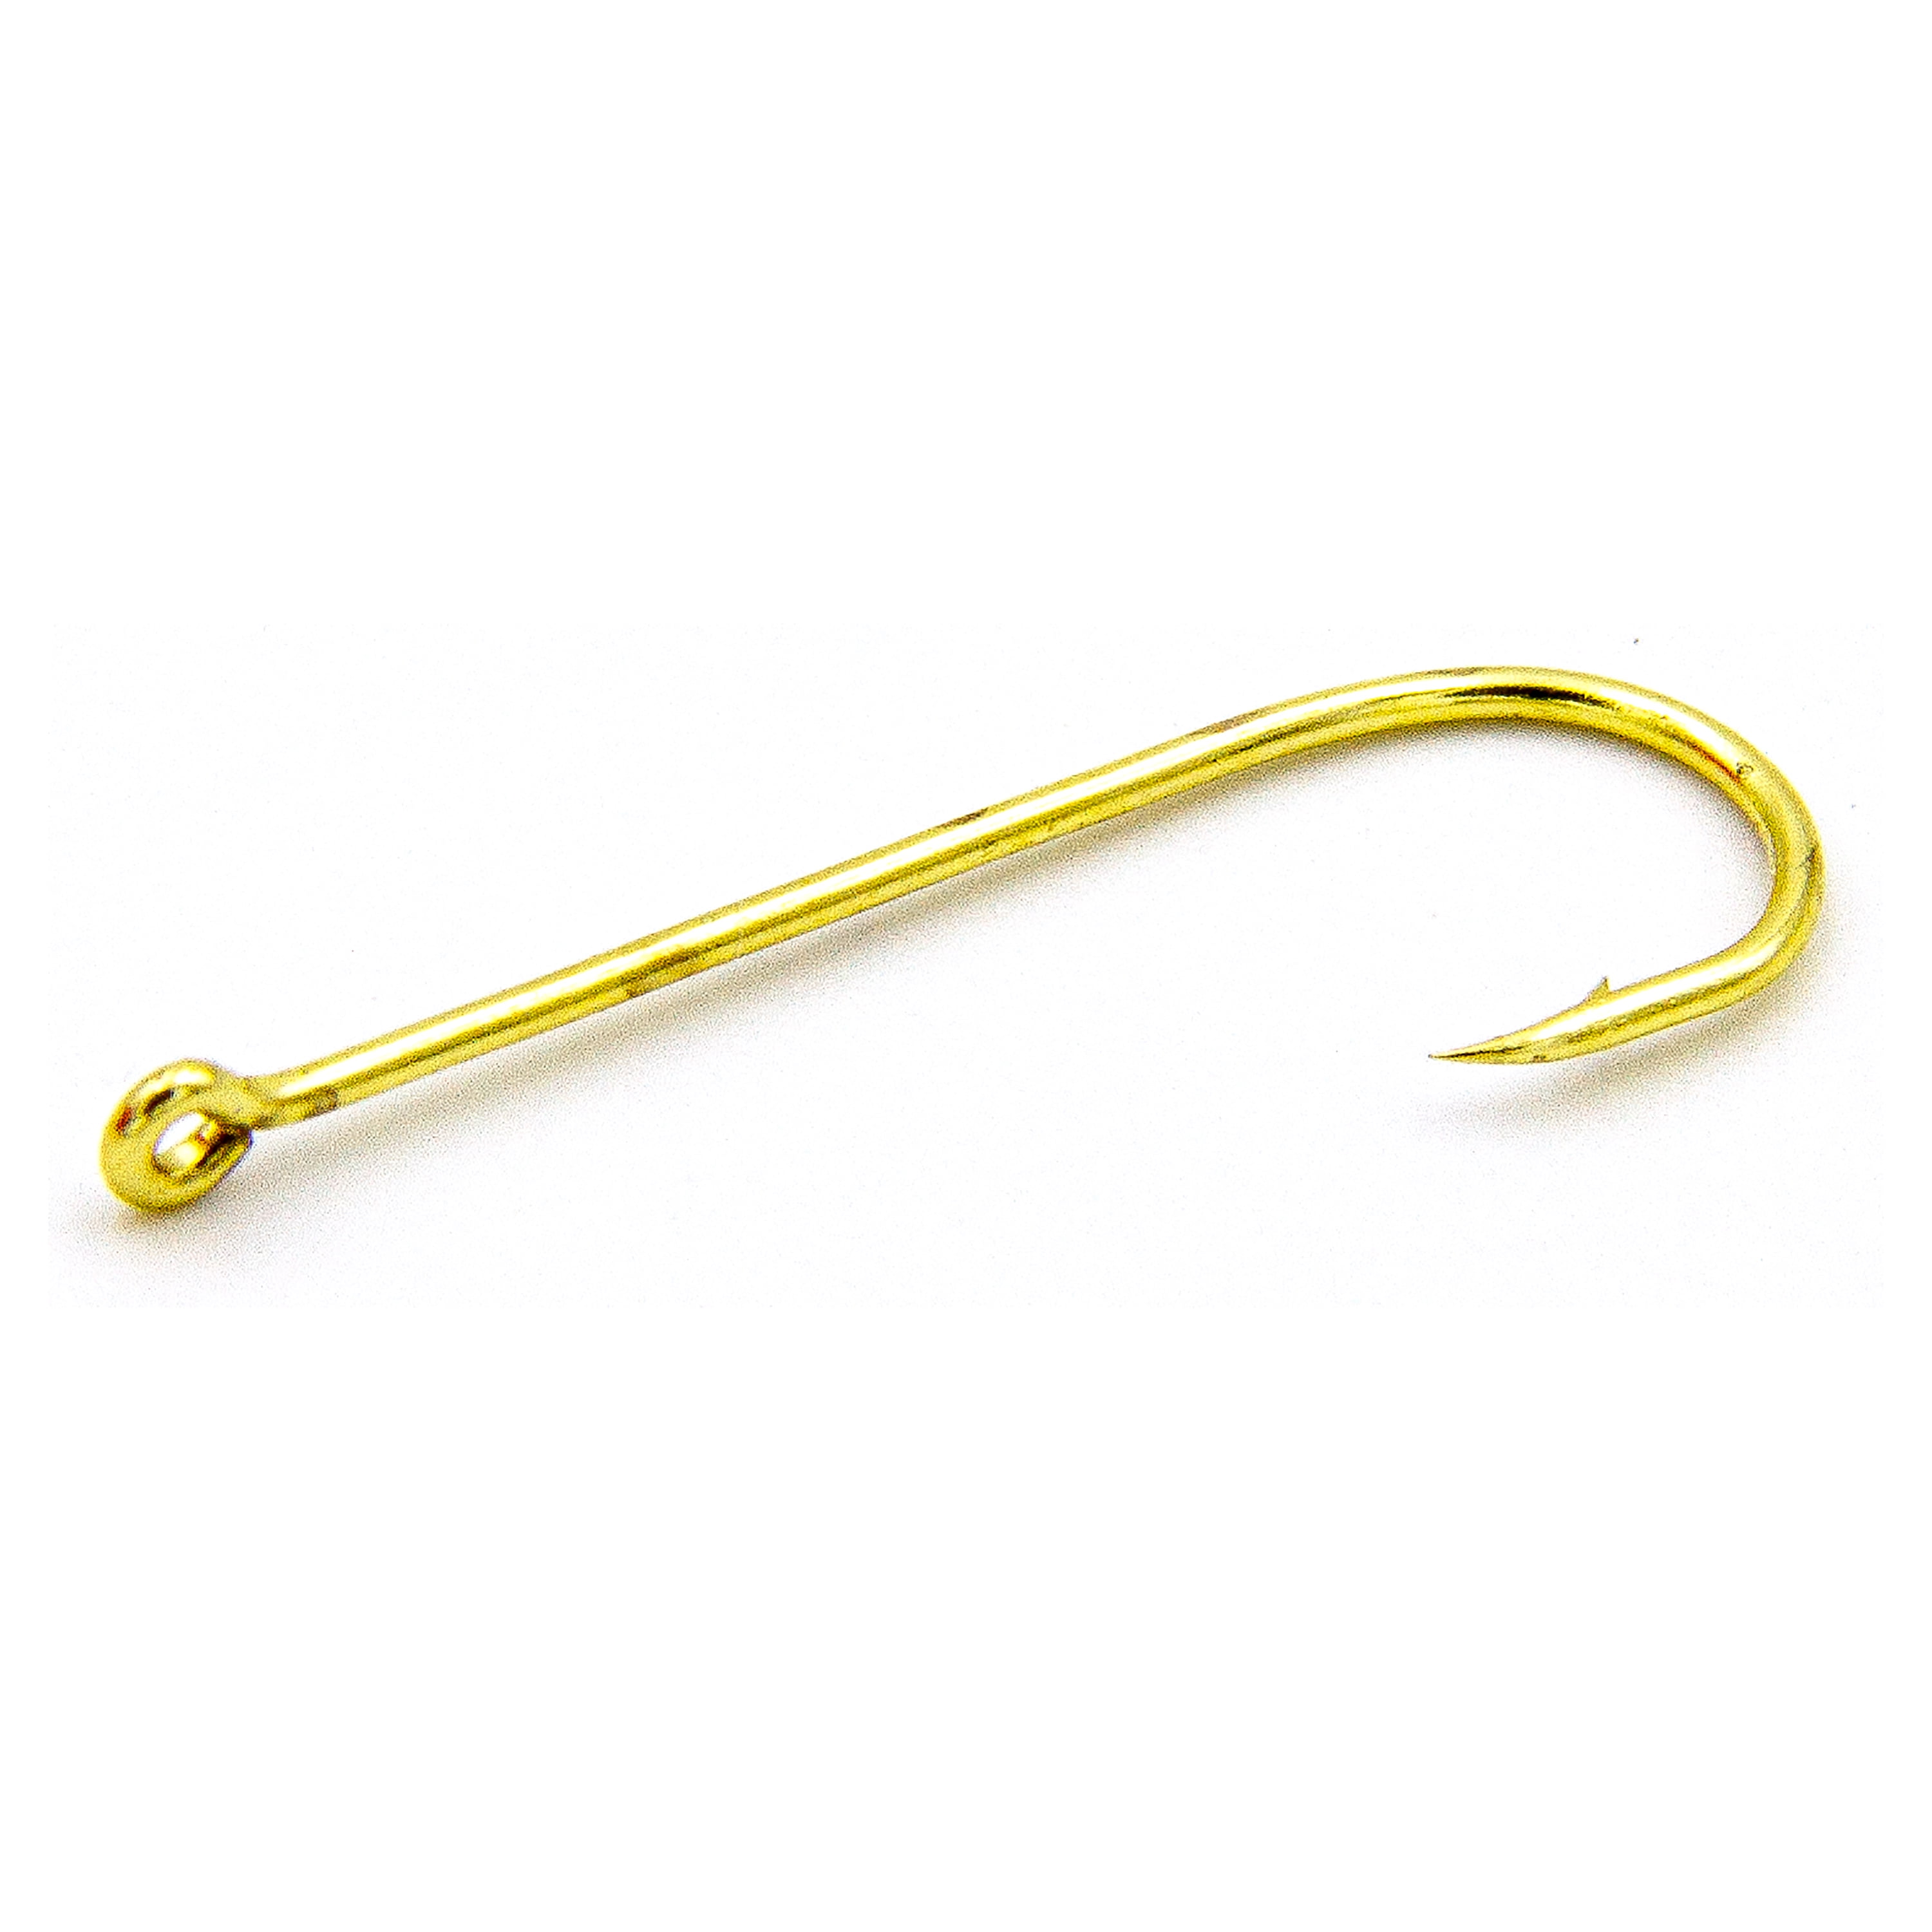 1pc Yellow Multi-functional Hook, 4-claw Traceless Hook, For Home